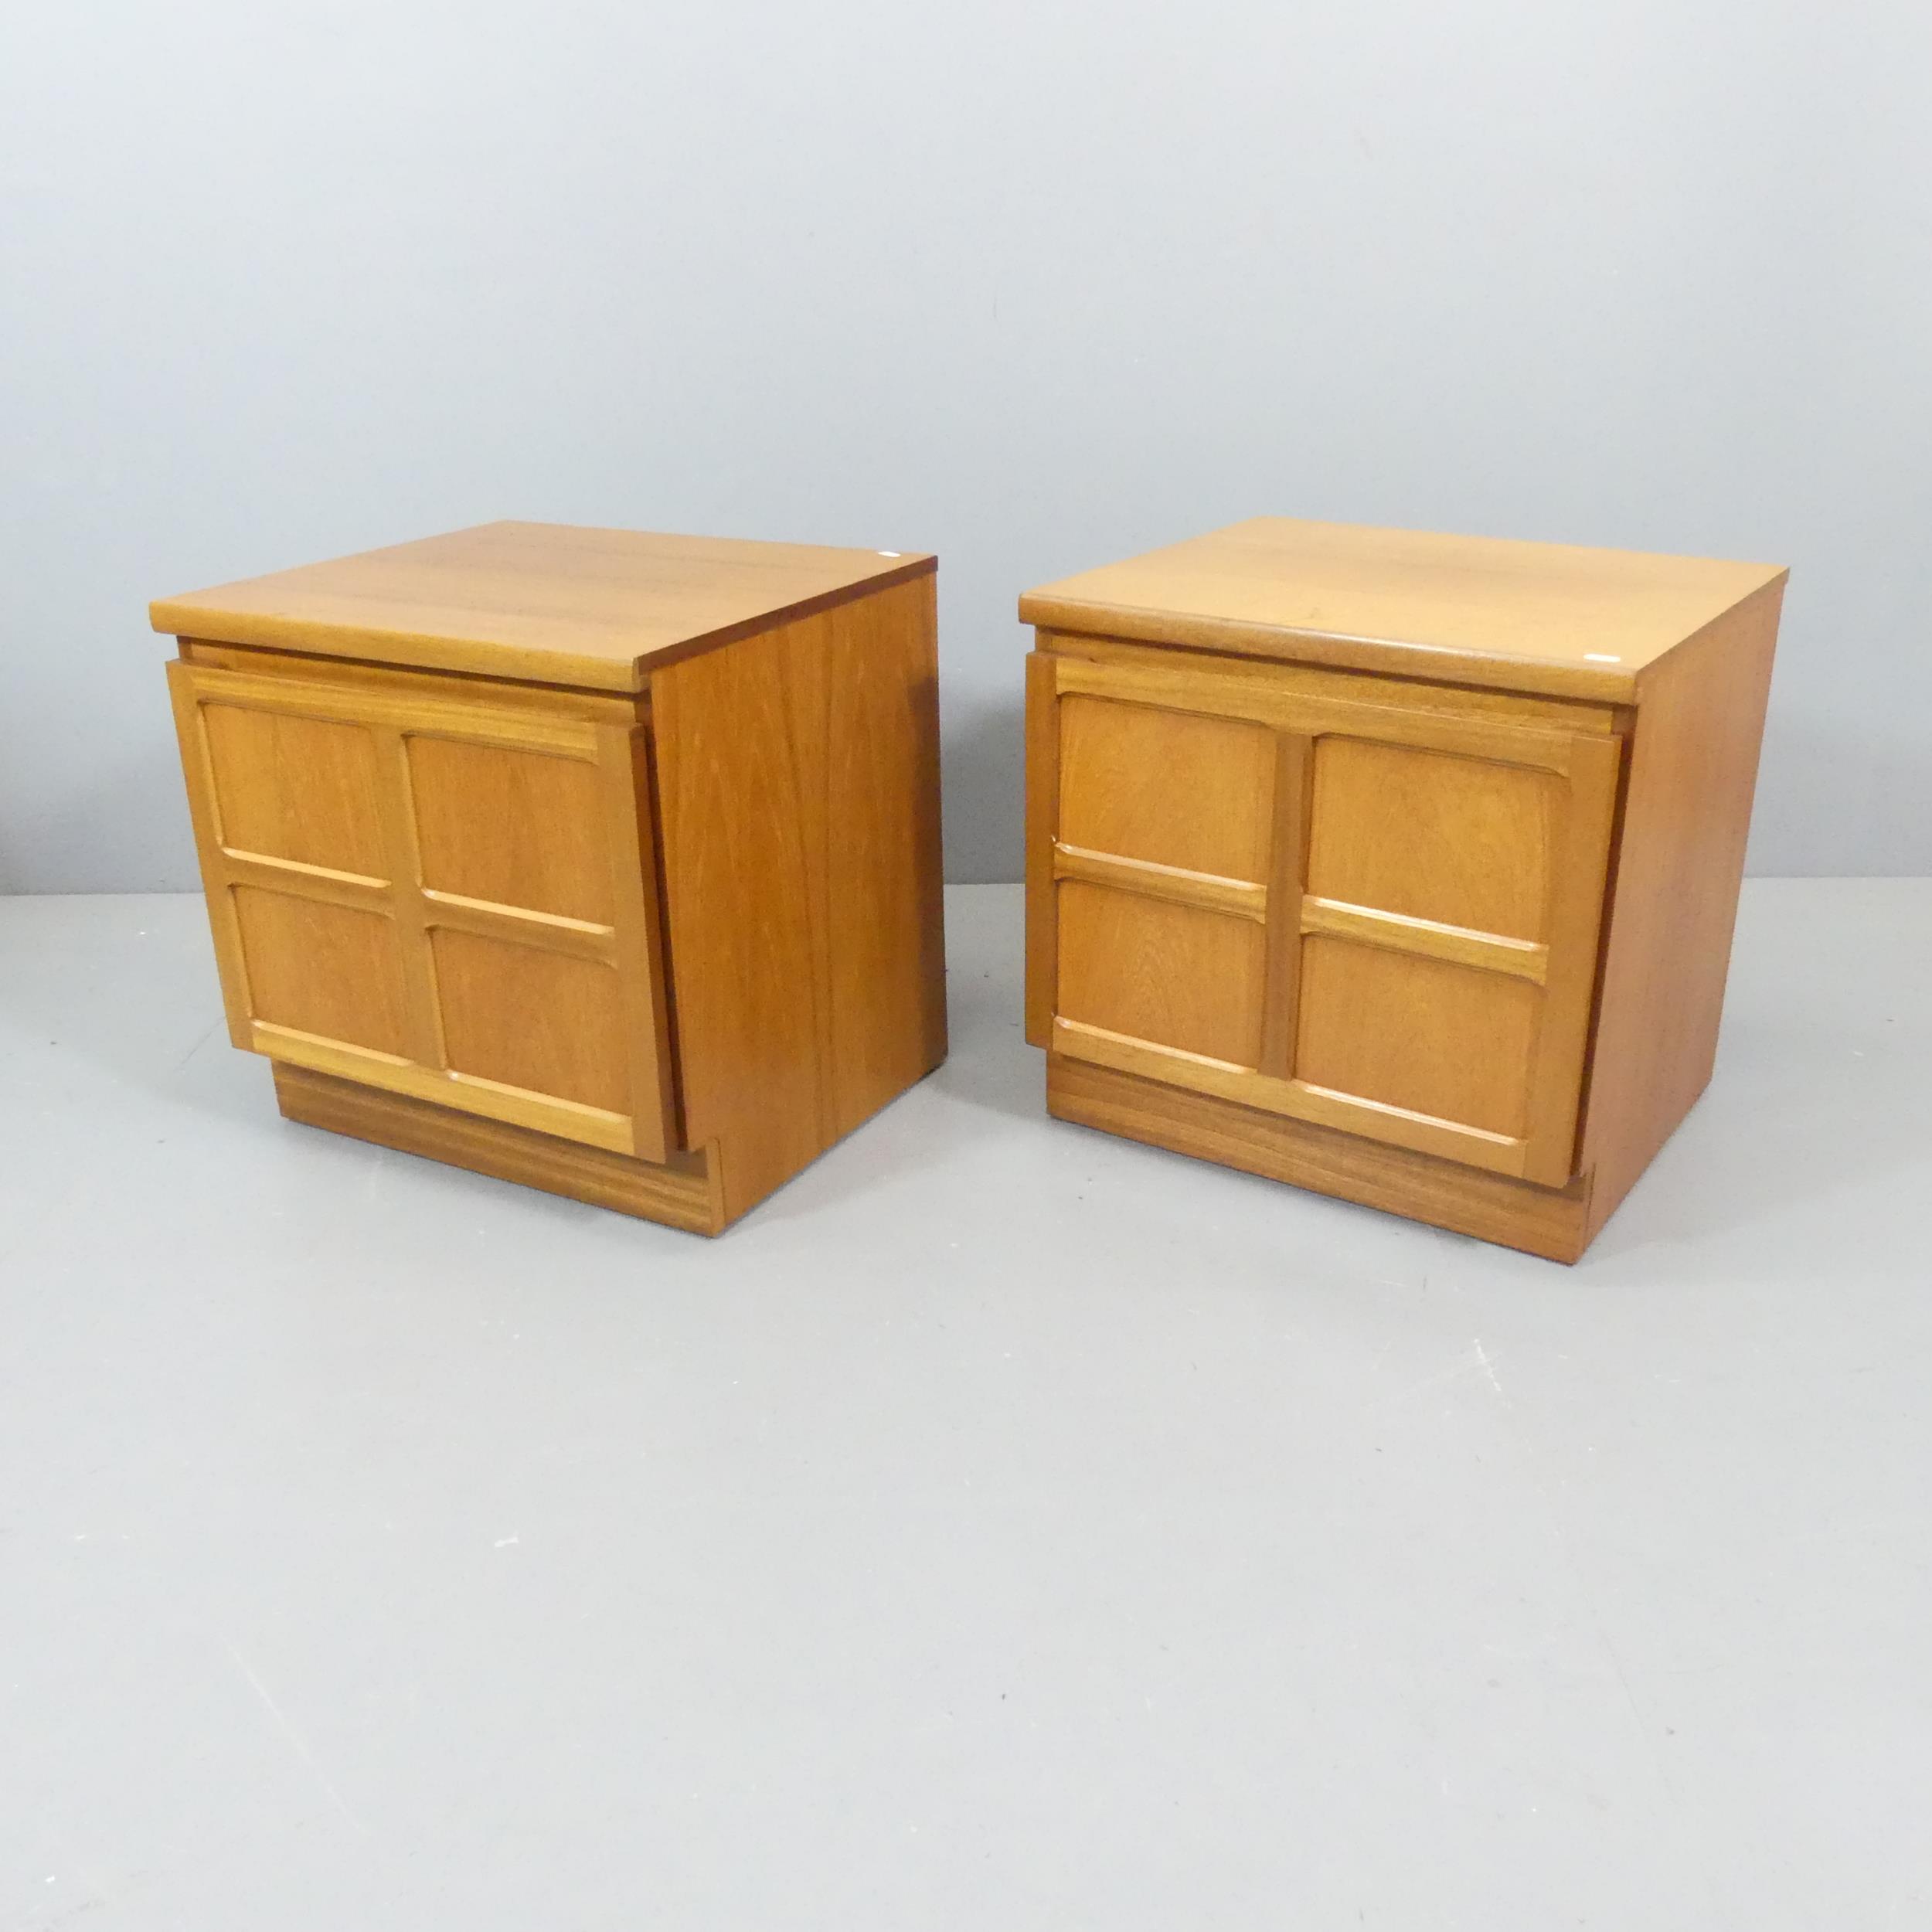 PARKER KNOLL - A pair of teak low or bedside cabinets, maker's mark to rear. 52x52x46cm.